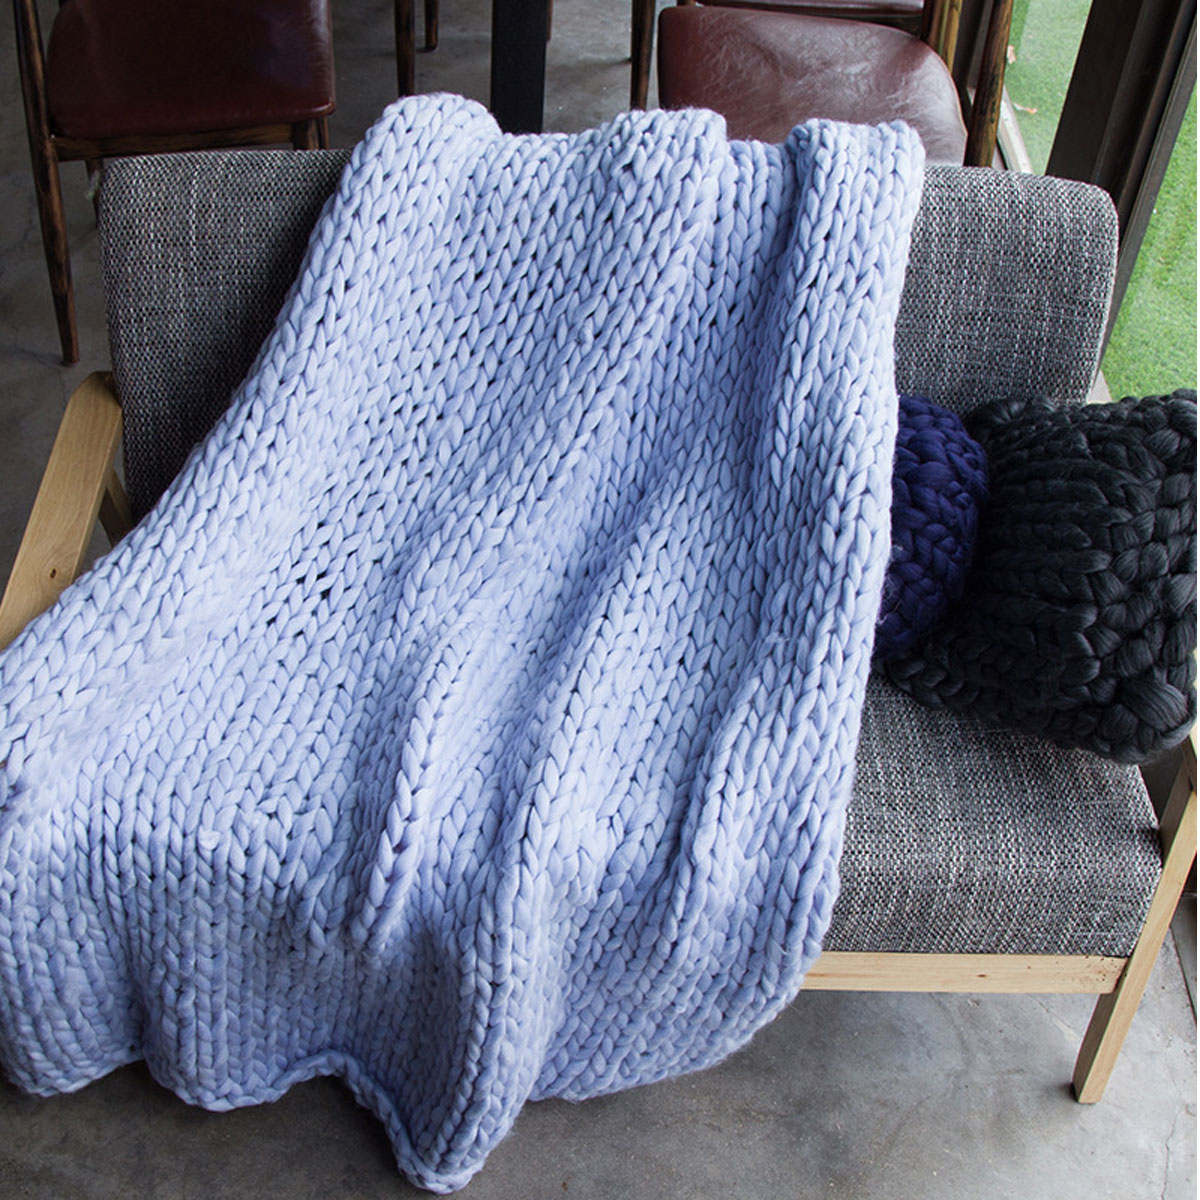 80x100CM-Handmade-Polyester-Fiber-Knitted-Blanket-Pure-Air-Conditioning-Bulky-Knitting-Throw-Blanket-1800712-6